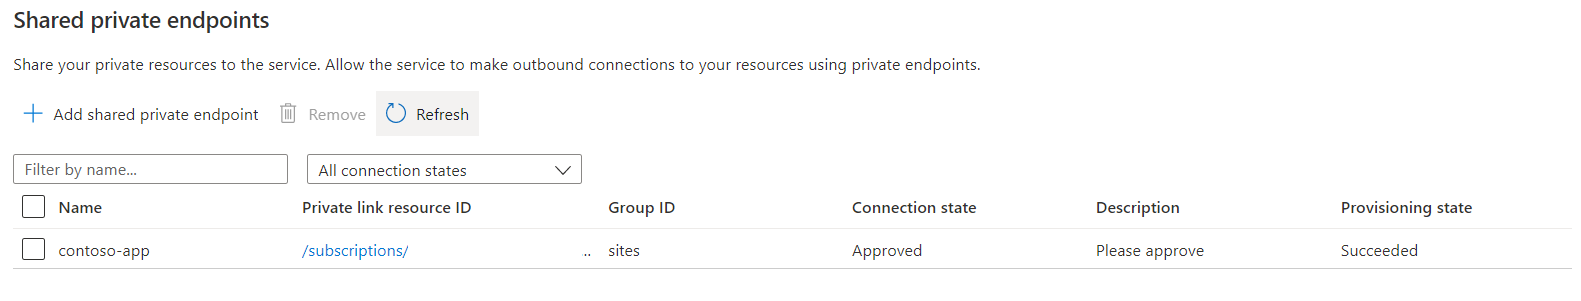 Screenshot of an approved shared private endpoint.